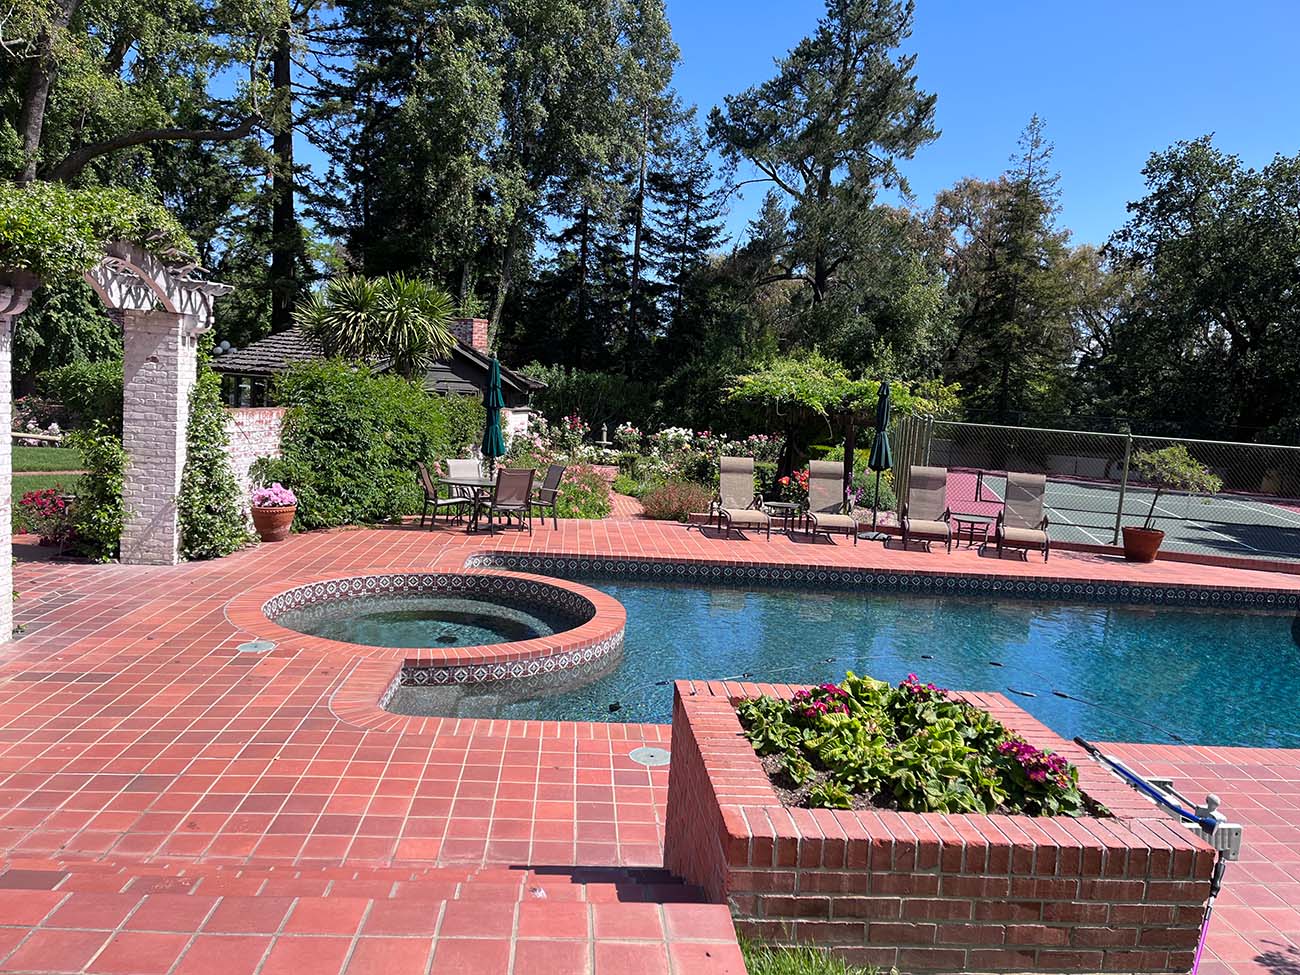 Large property garden care and maintenance in Saratoga, California